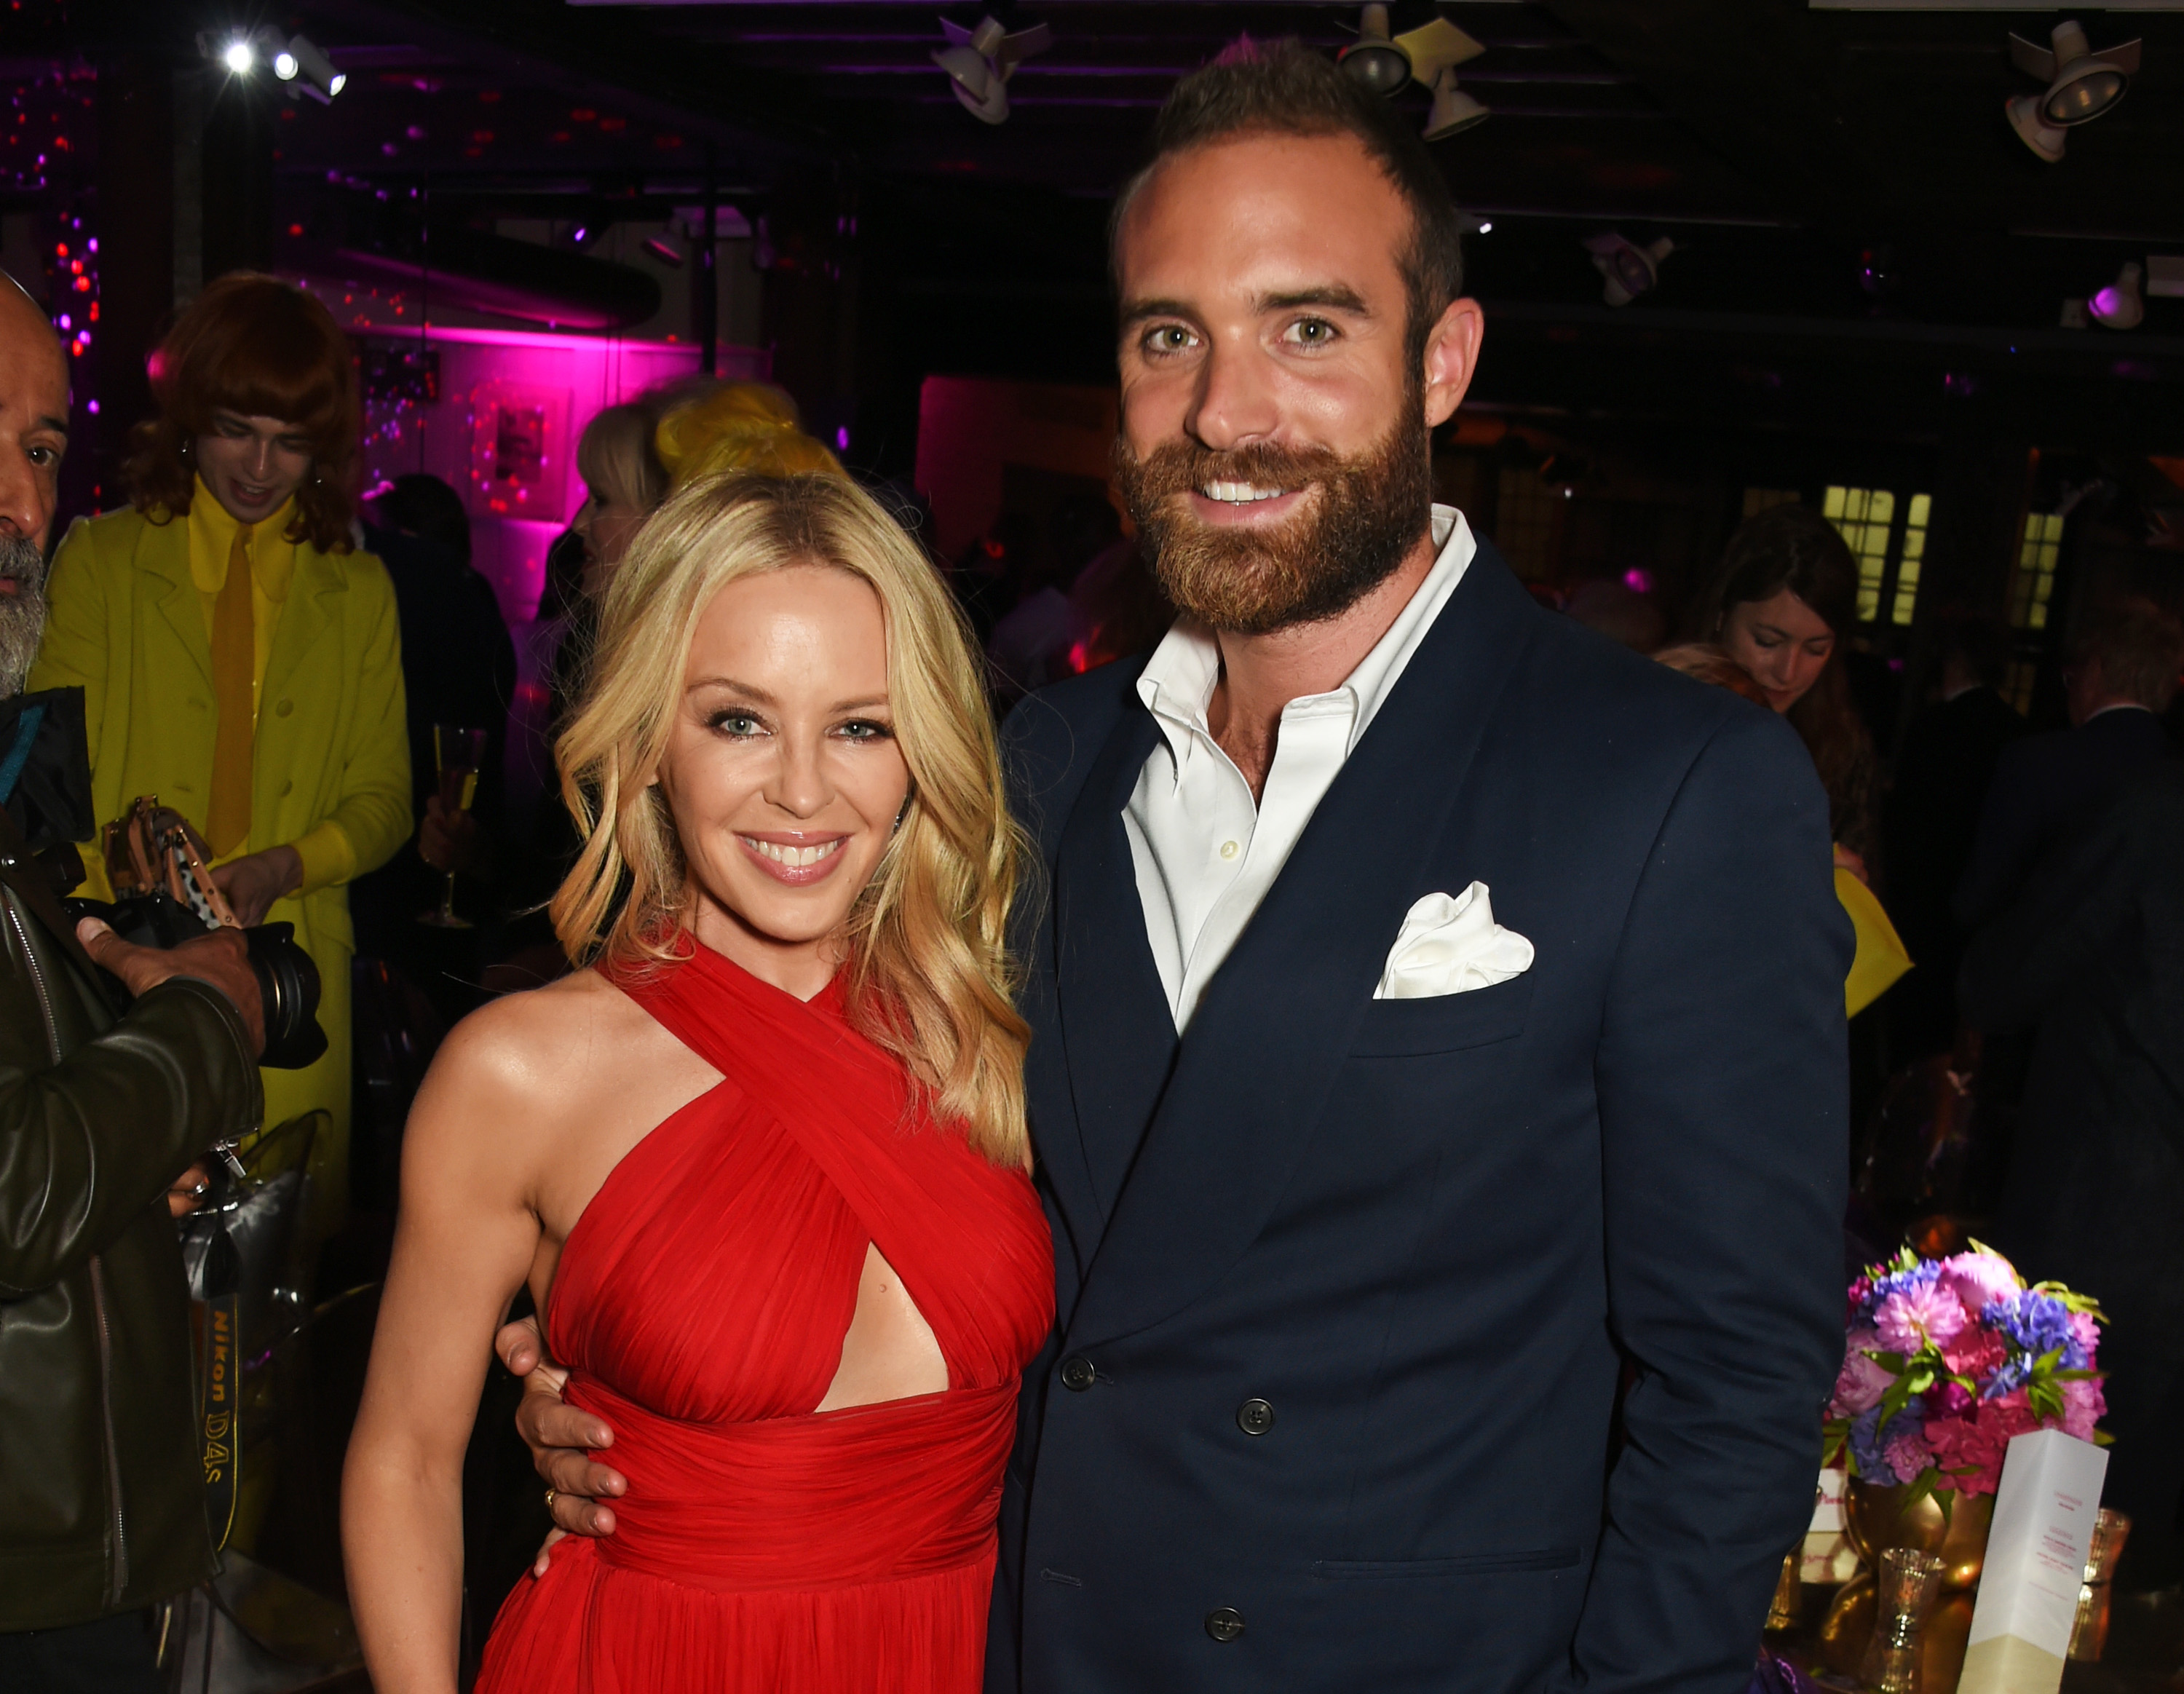 Kylie Minogue, left, and Joshua Sasse at an afterparty for <i>Absolutely Fabulous: The Movie</i> in London on June 29, 2016 (David M. Benett—WireImage)